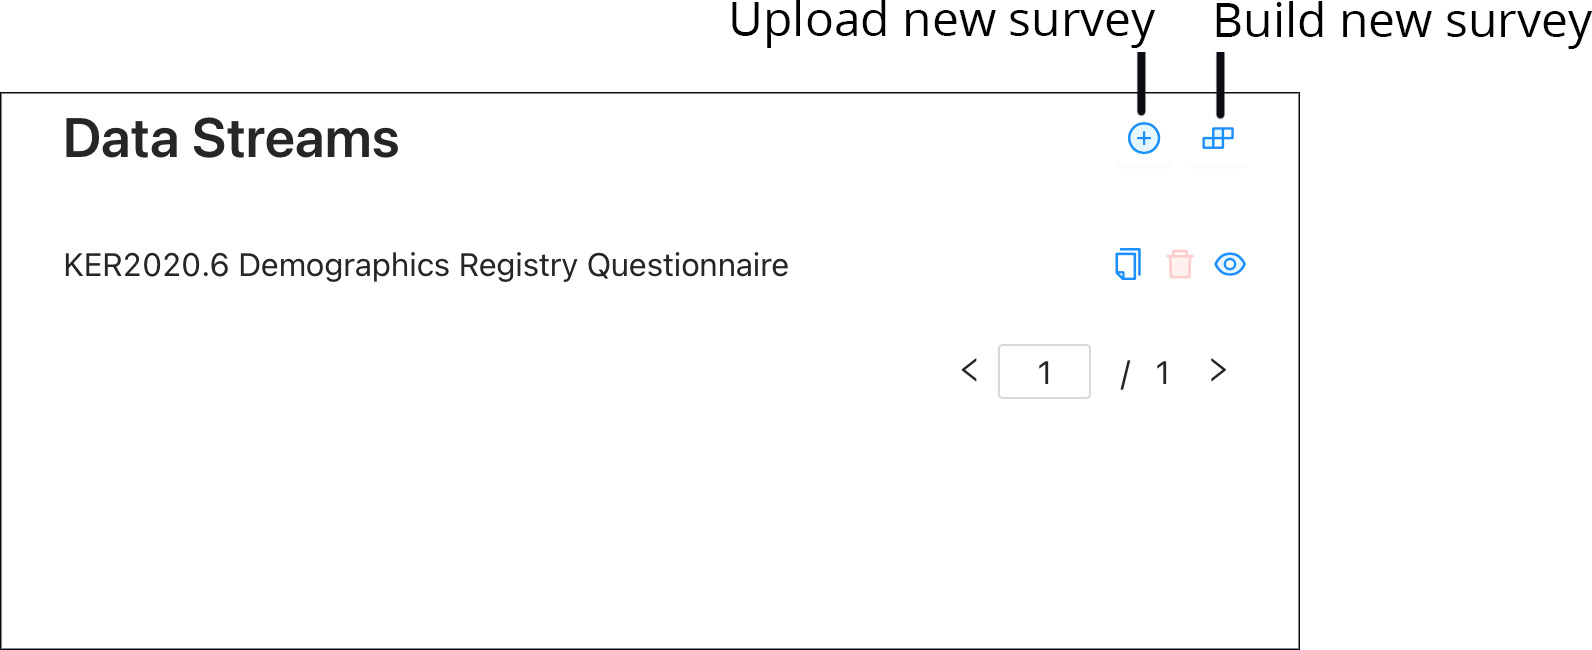 Image; Data Streams section of Session page in Researcher Portal with Upload New Survey and Build New Survey buttons called out.